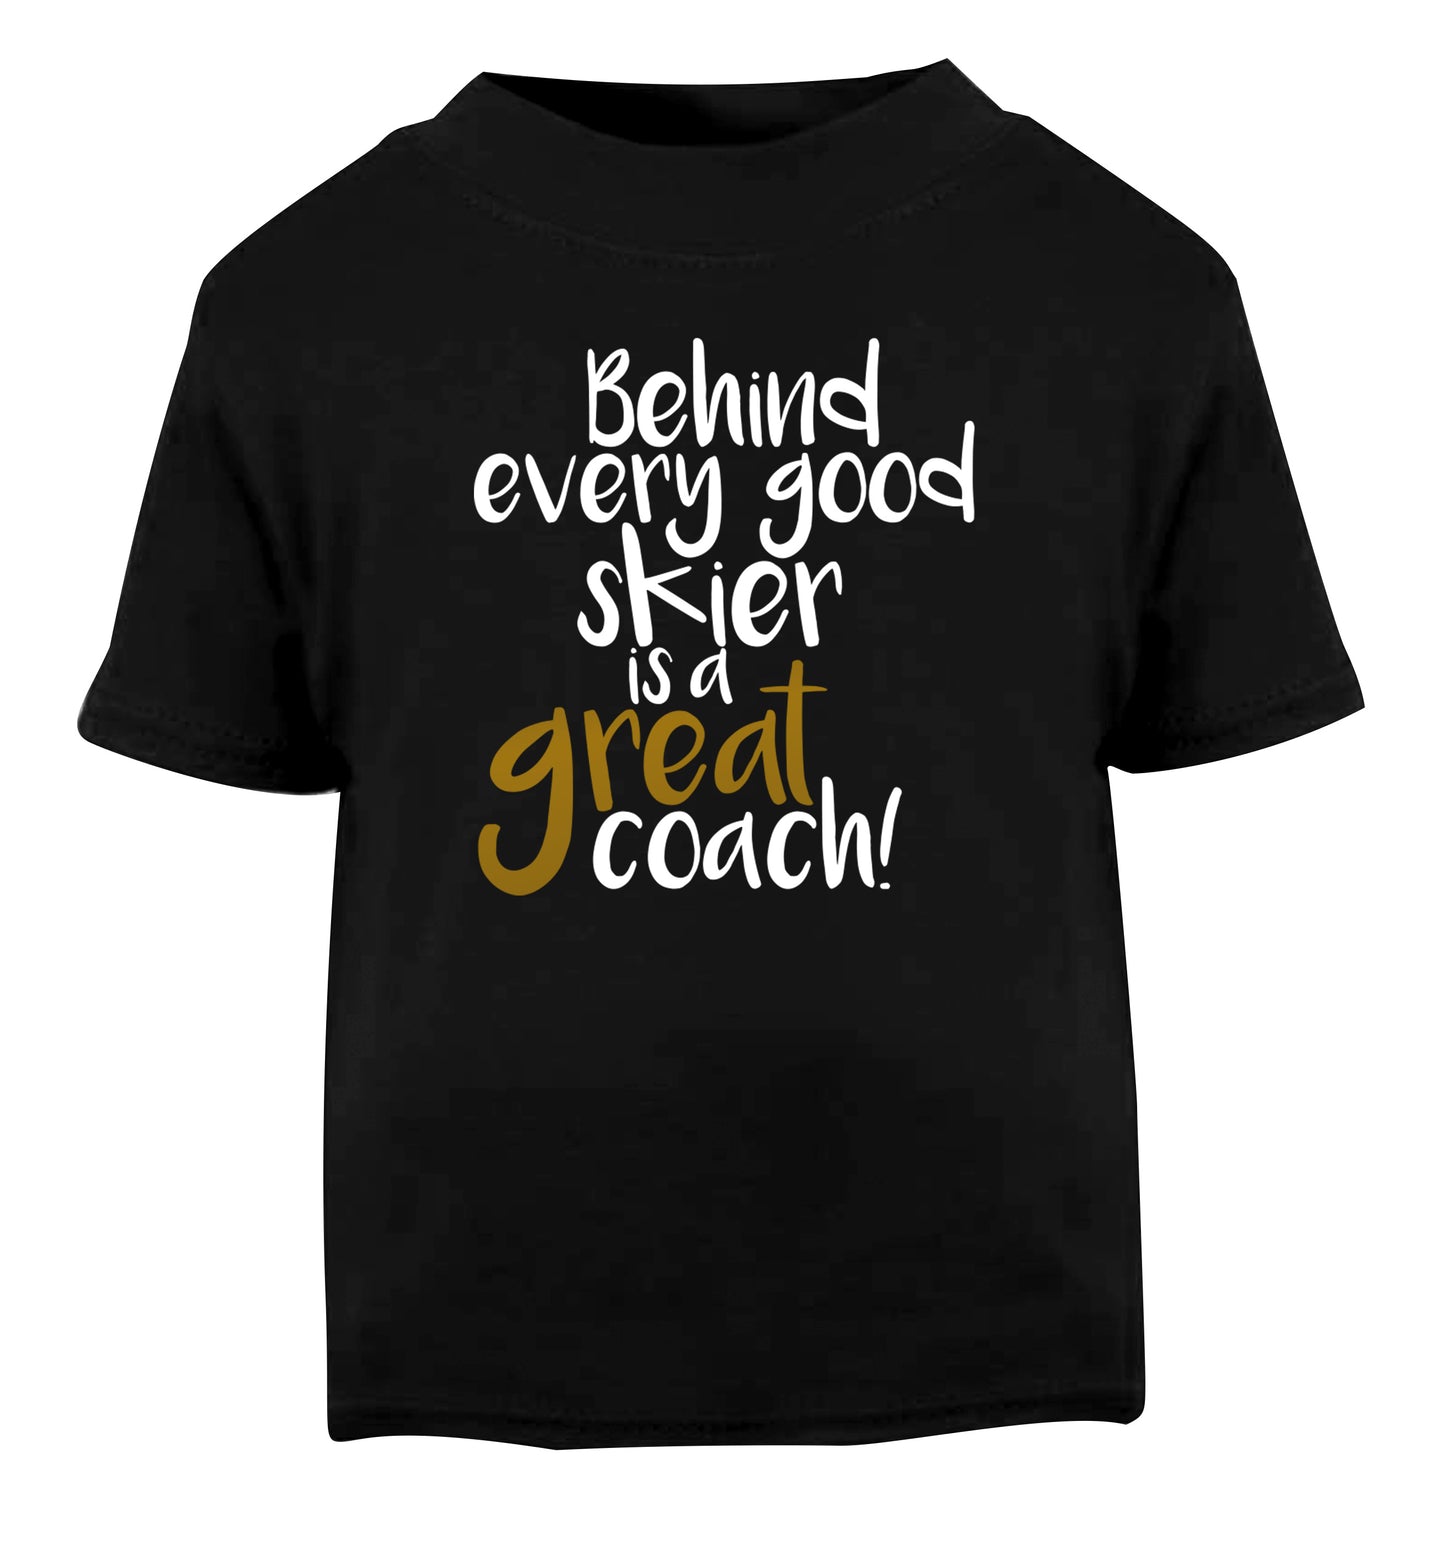 Behind every good skier is a great coach! Black Baby Toddler Tshirt 2 years